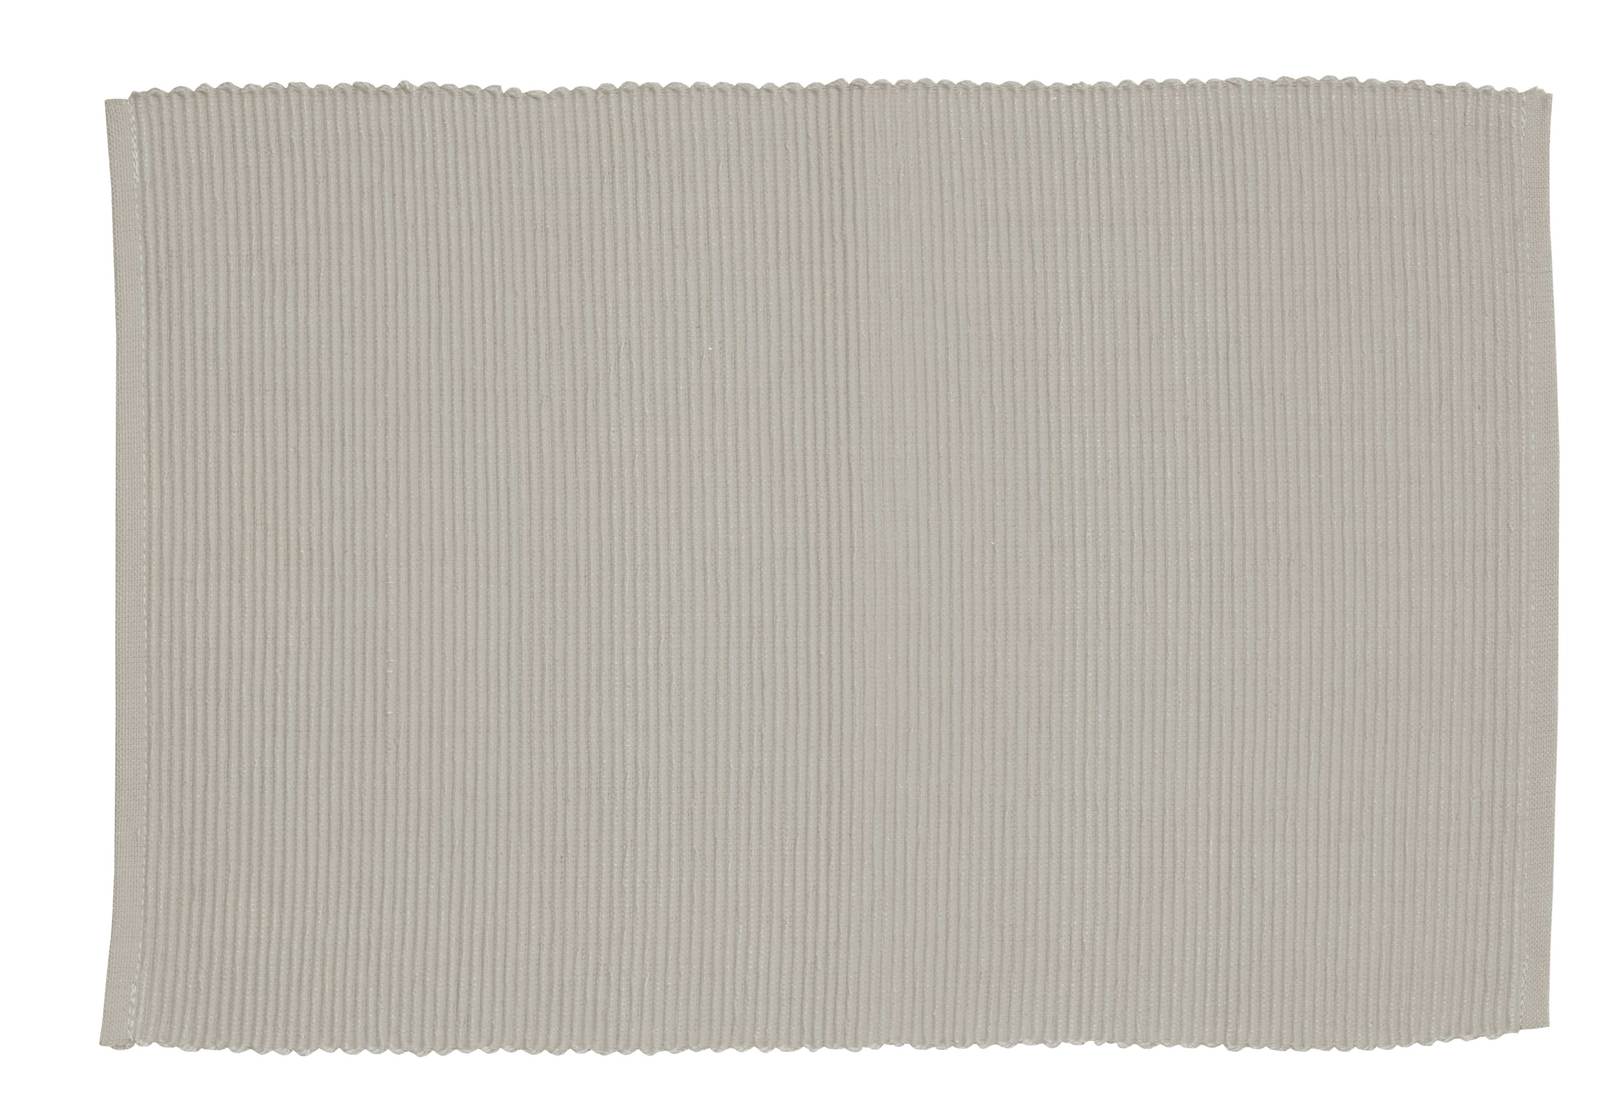 Lollipop Ribbed Placemat - 33 cm x 48 cm (set of 6) in Light Grey